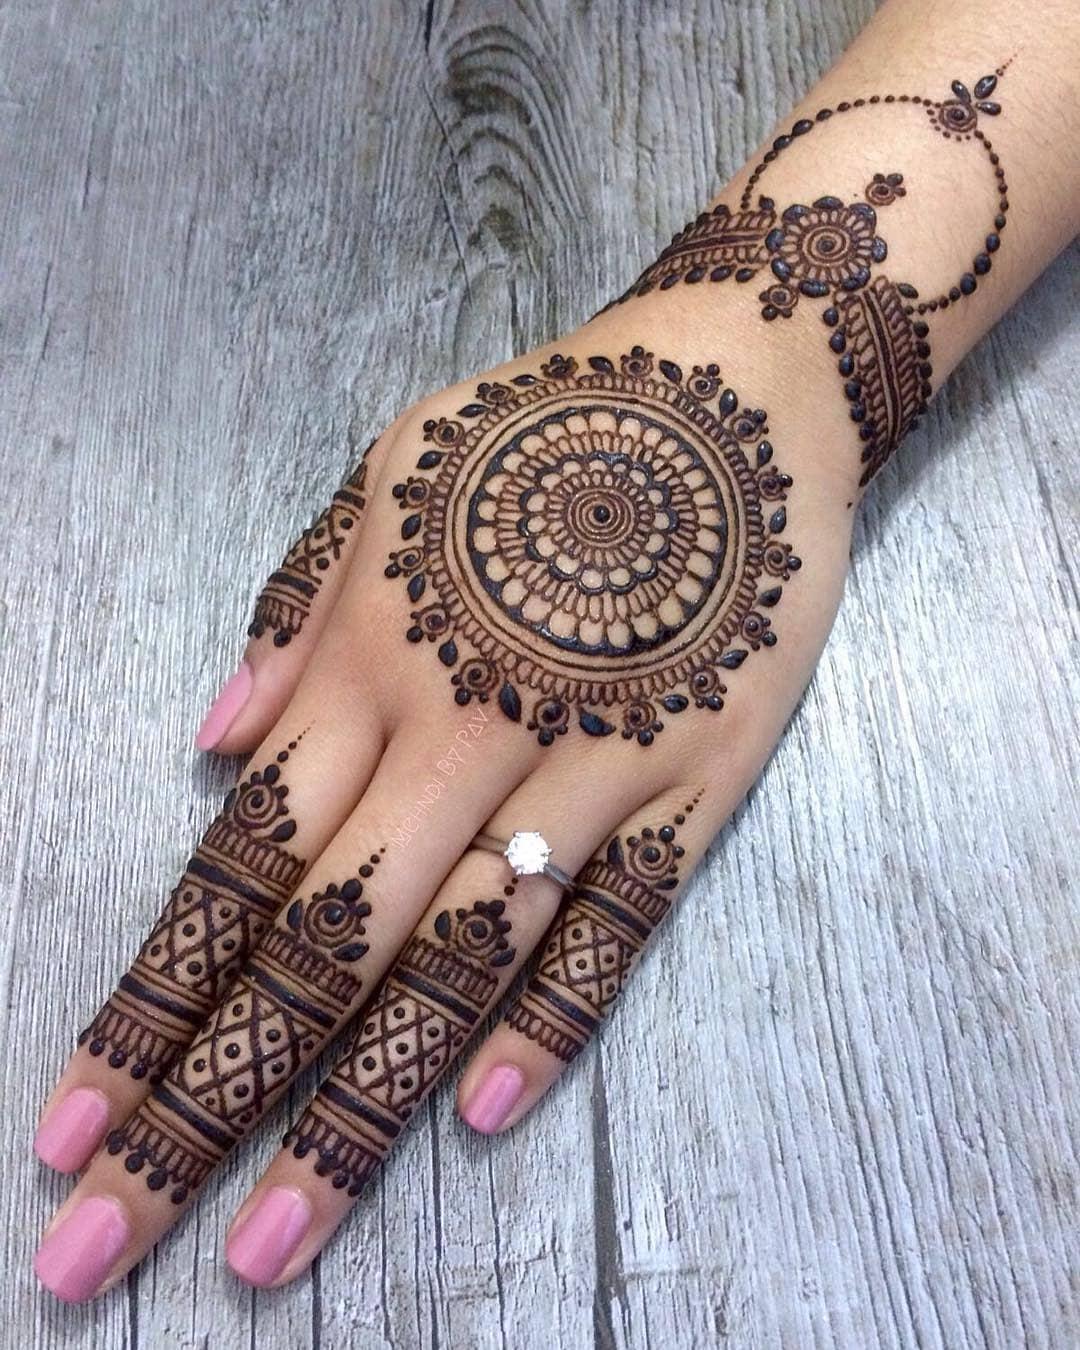 10 Small and Simple Round Mehendi Designs